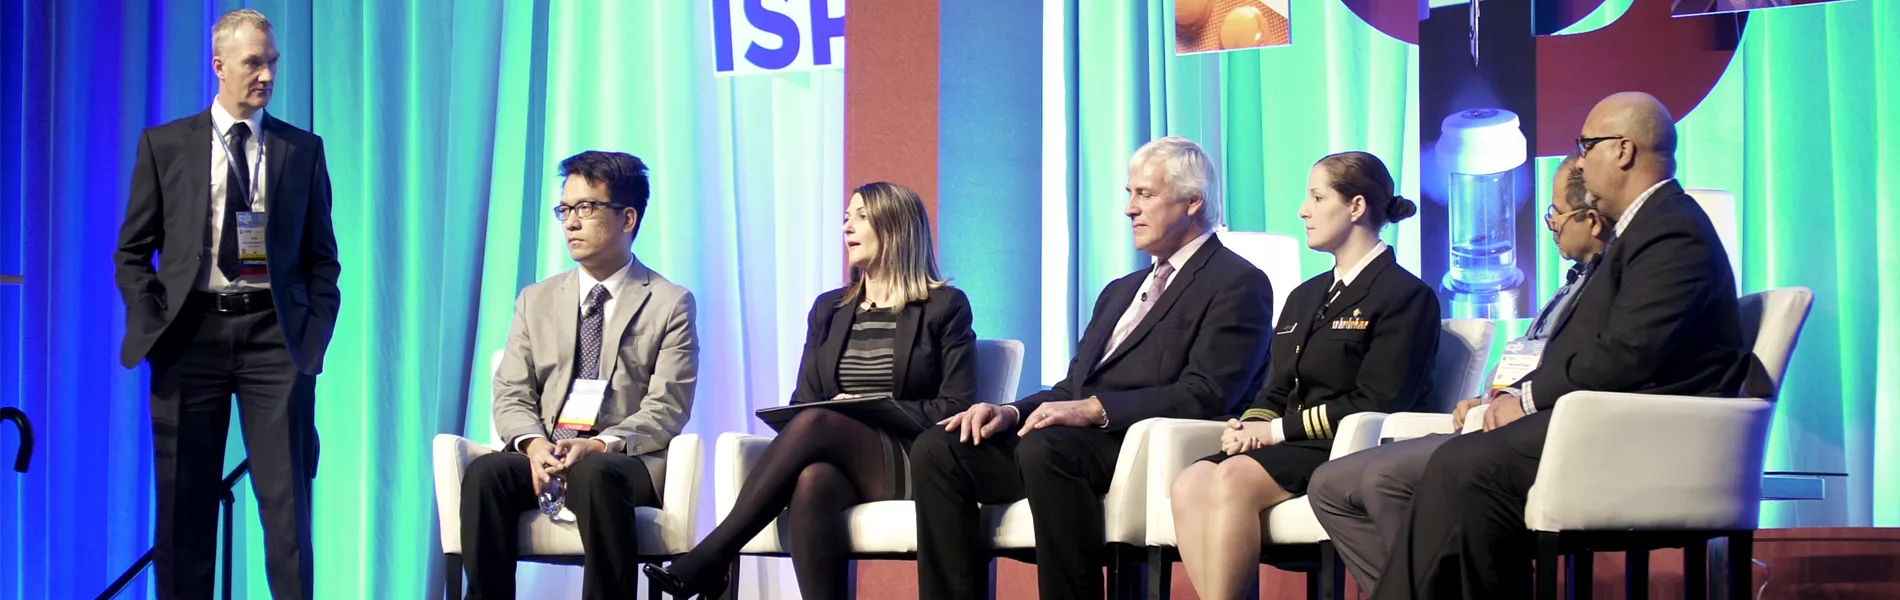 Regulatory Town Hall at the 2018 ISPE Annual Meeting & Expo